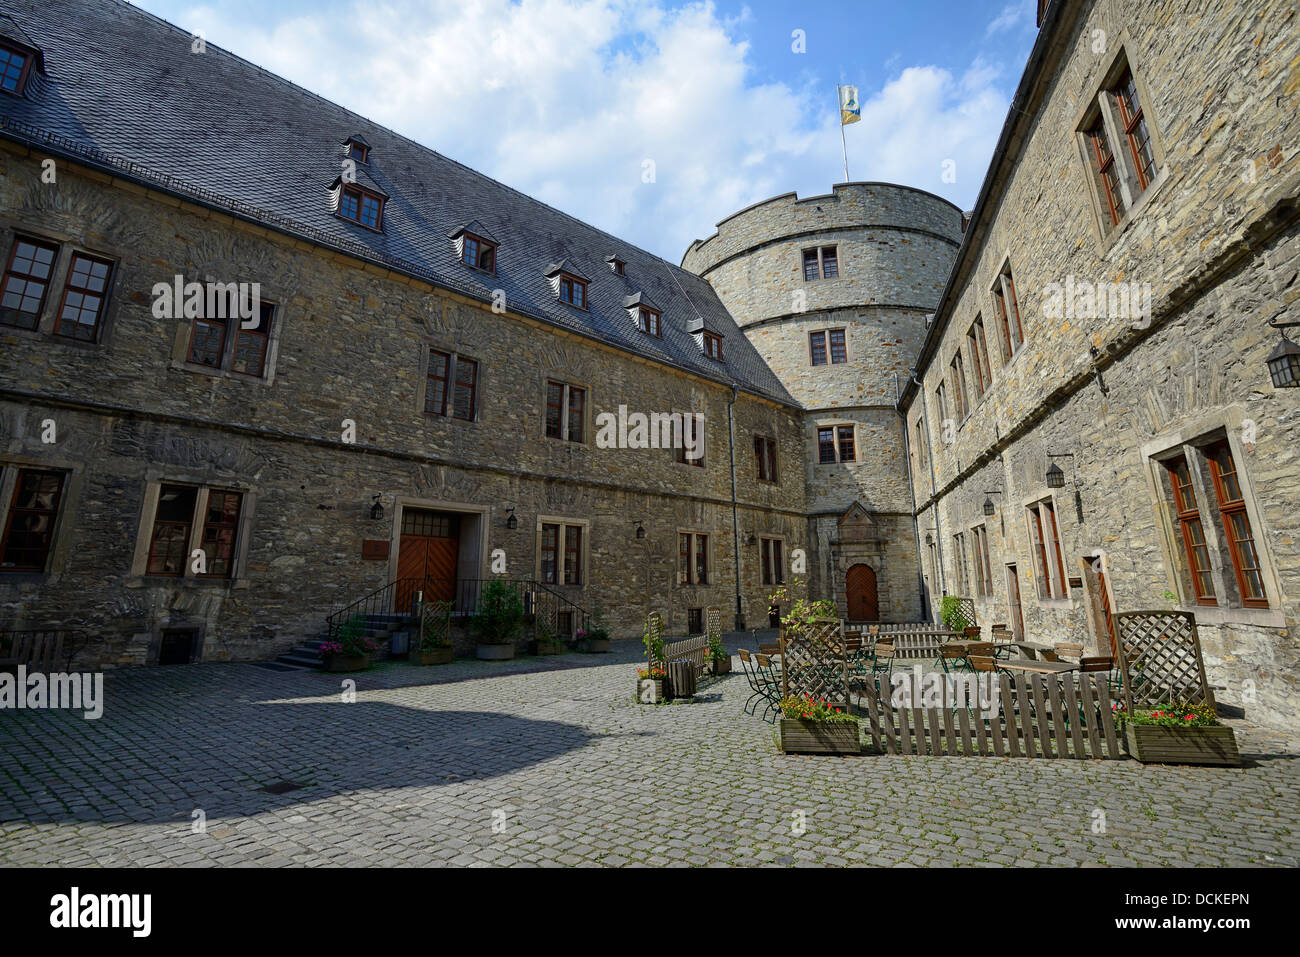 Courtyard of Wewelsburg Castle, now a museum outlining the atrocities of the SS, Wewelsburg, Germany, Europe Stock Photo